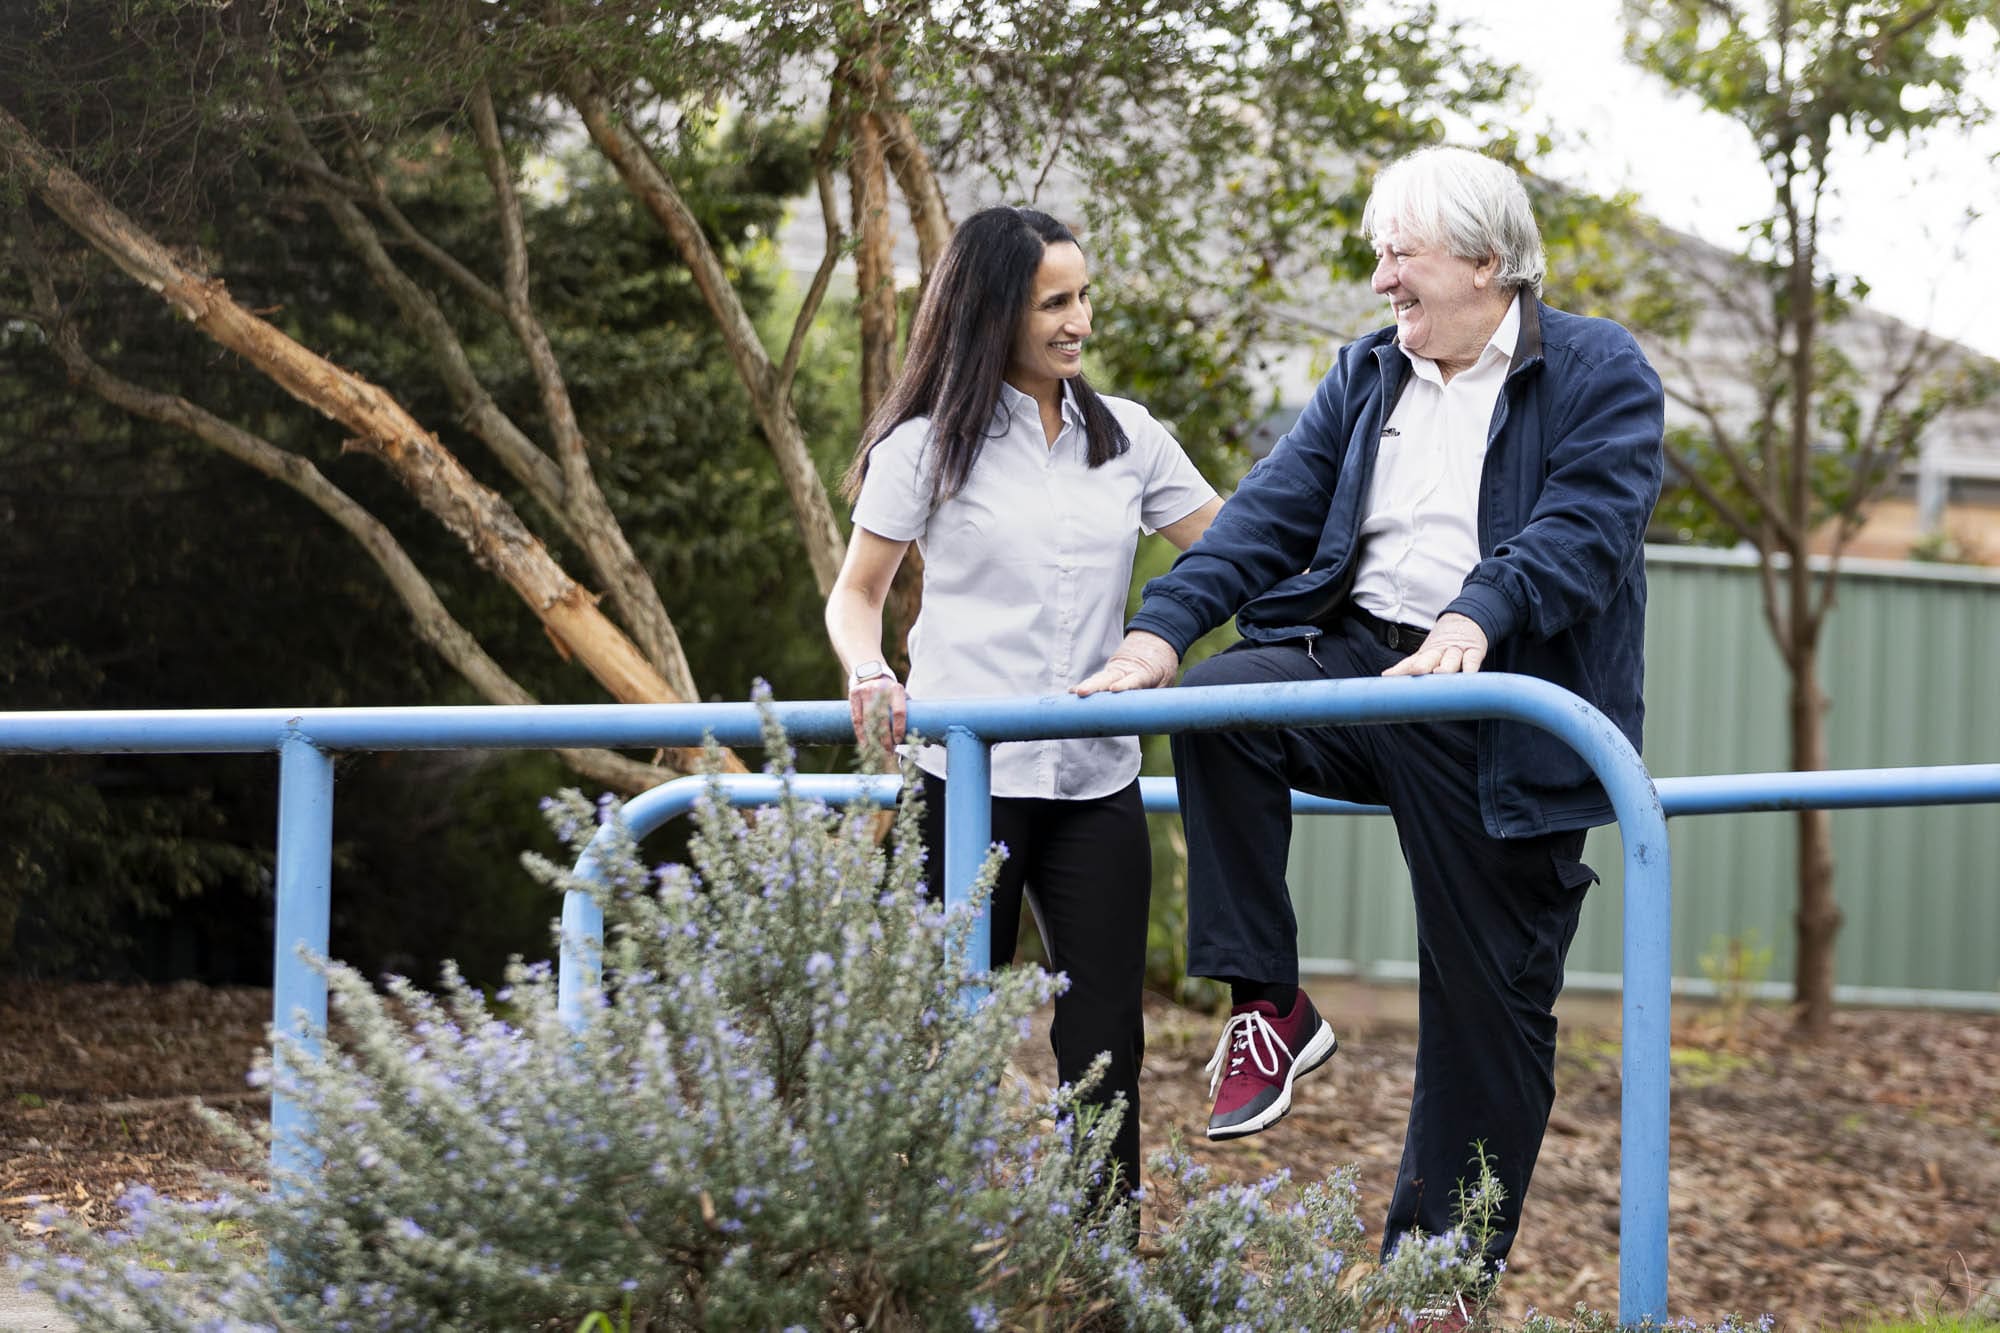 A man and woman standing on a railing in a retirement village park.